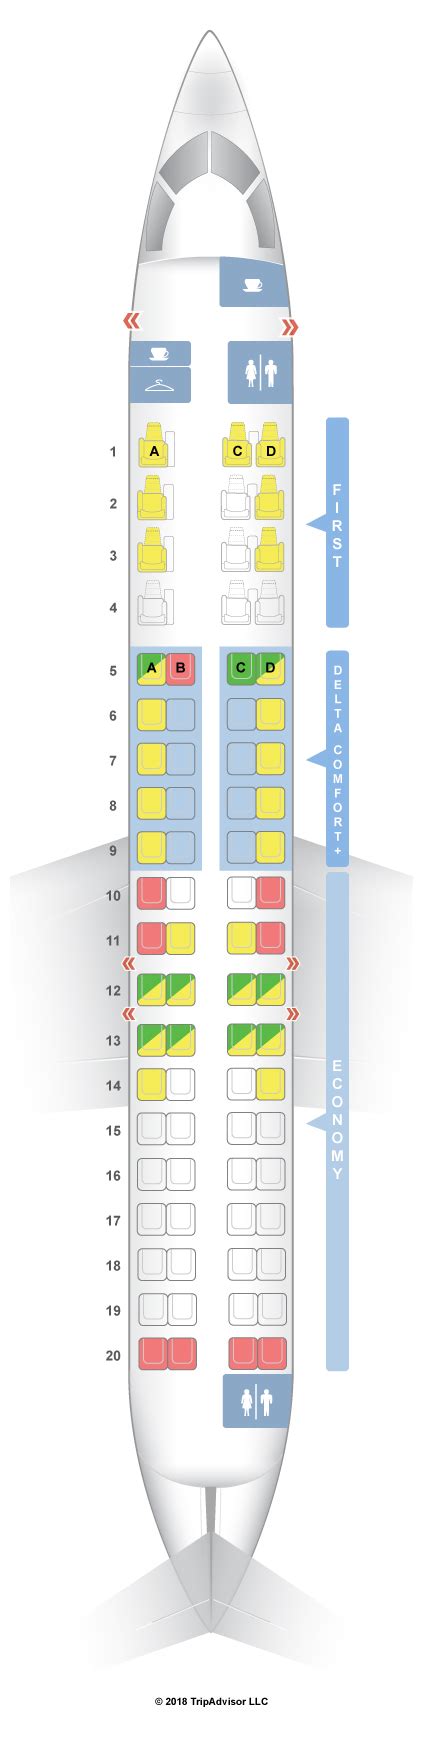 Crj9 seat map. Air France's A350-900 features a three class configuration with 34 lie flat Business Class seats, 24 Premium Economy seats and 266 standard Economy Class seats. The A350-900 features a new Business Class product with 34 Zodiac Optima seats configured in a 1-2-1 configuration. Submitted by. Very comfortable to sleep on, but a little cramped and ... 